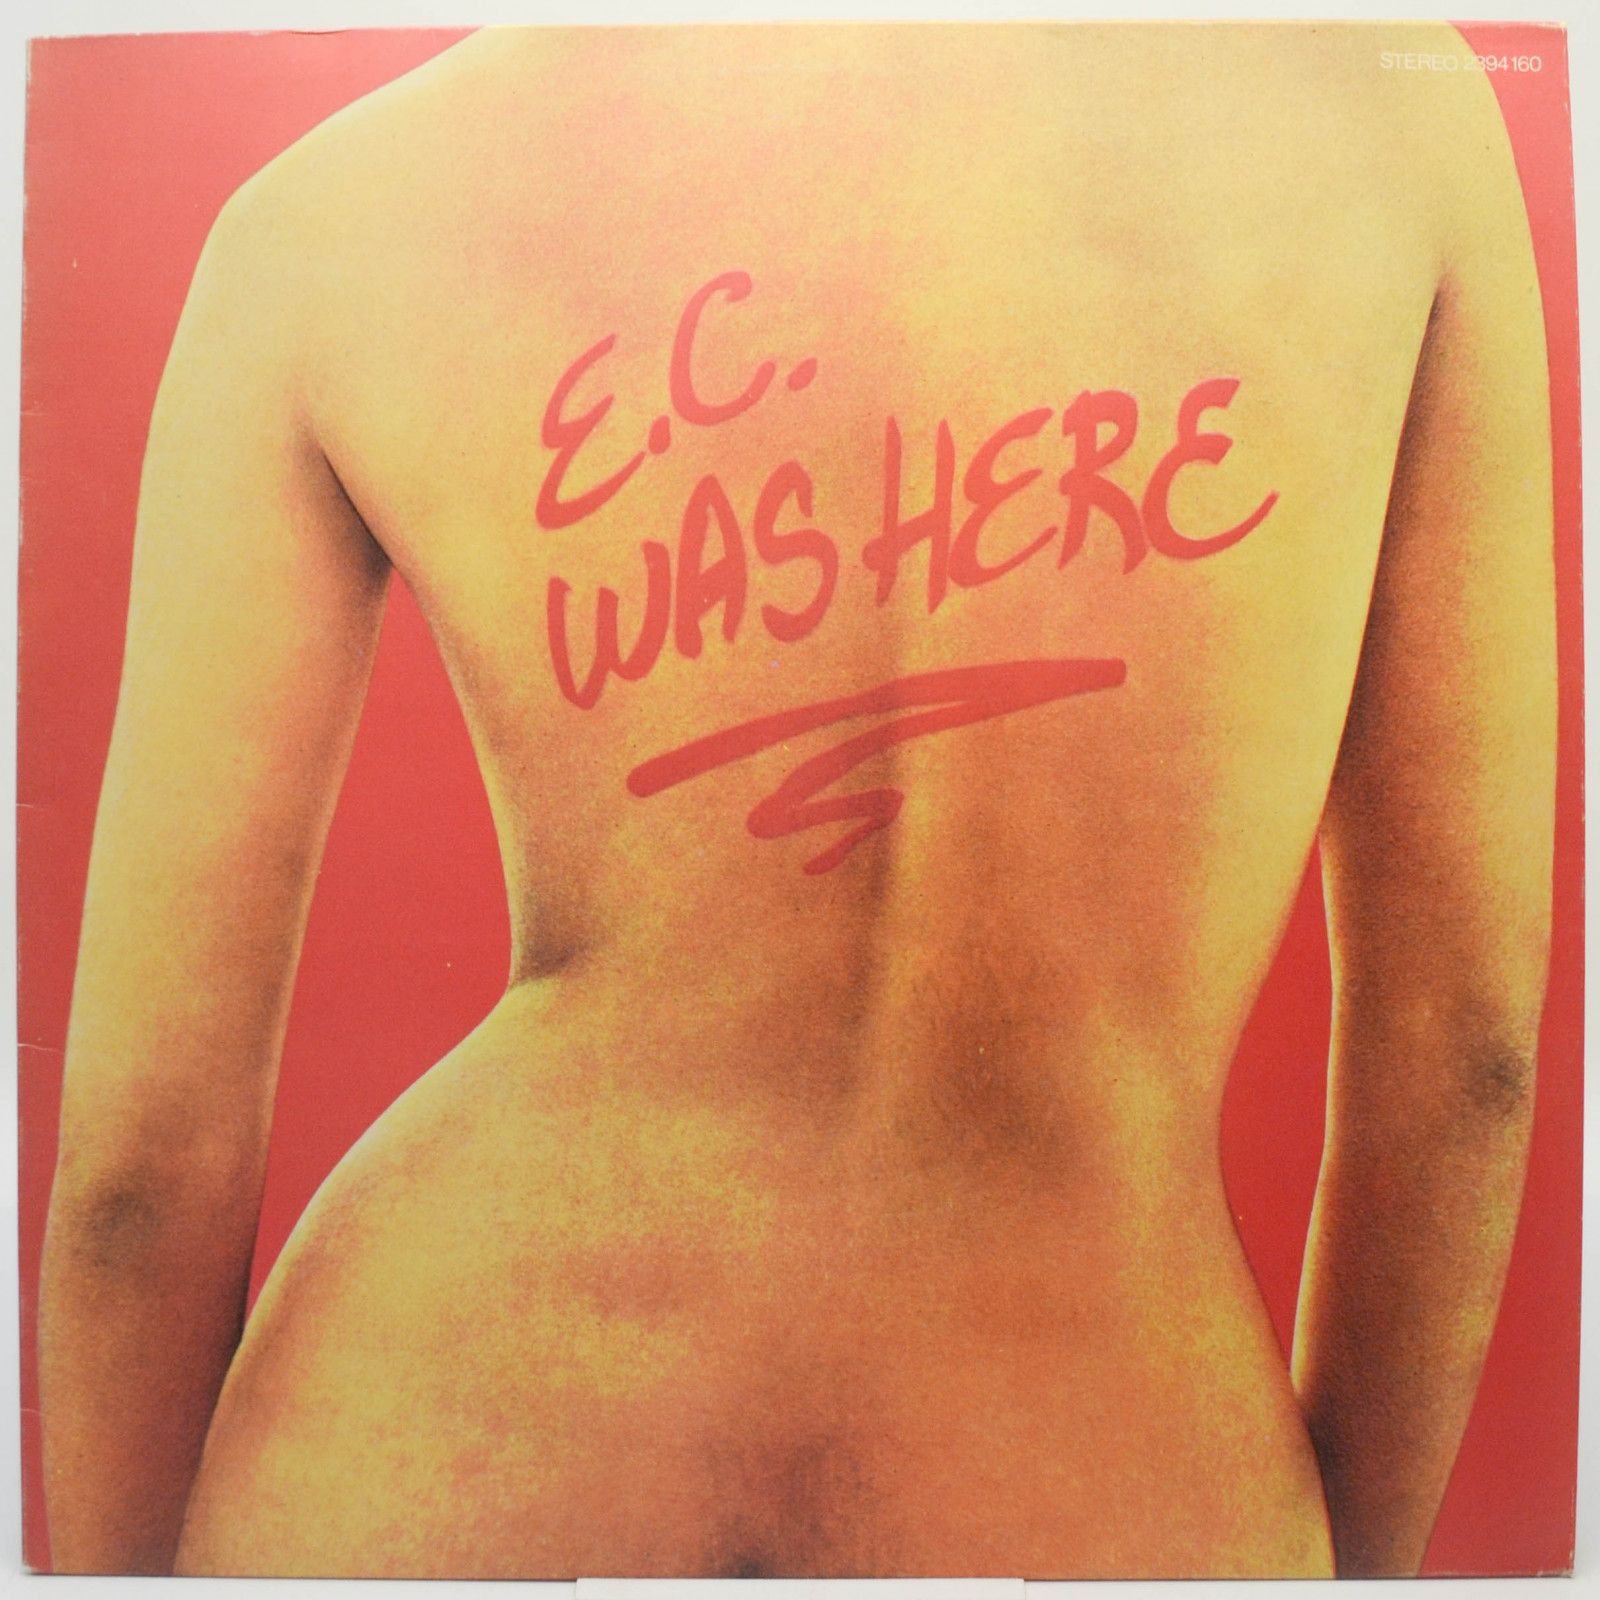 Eric Clapton — E.C. Was Here, 1975